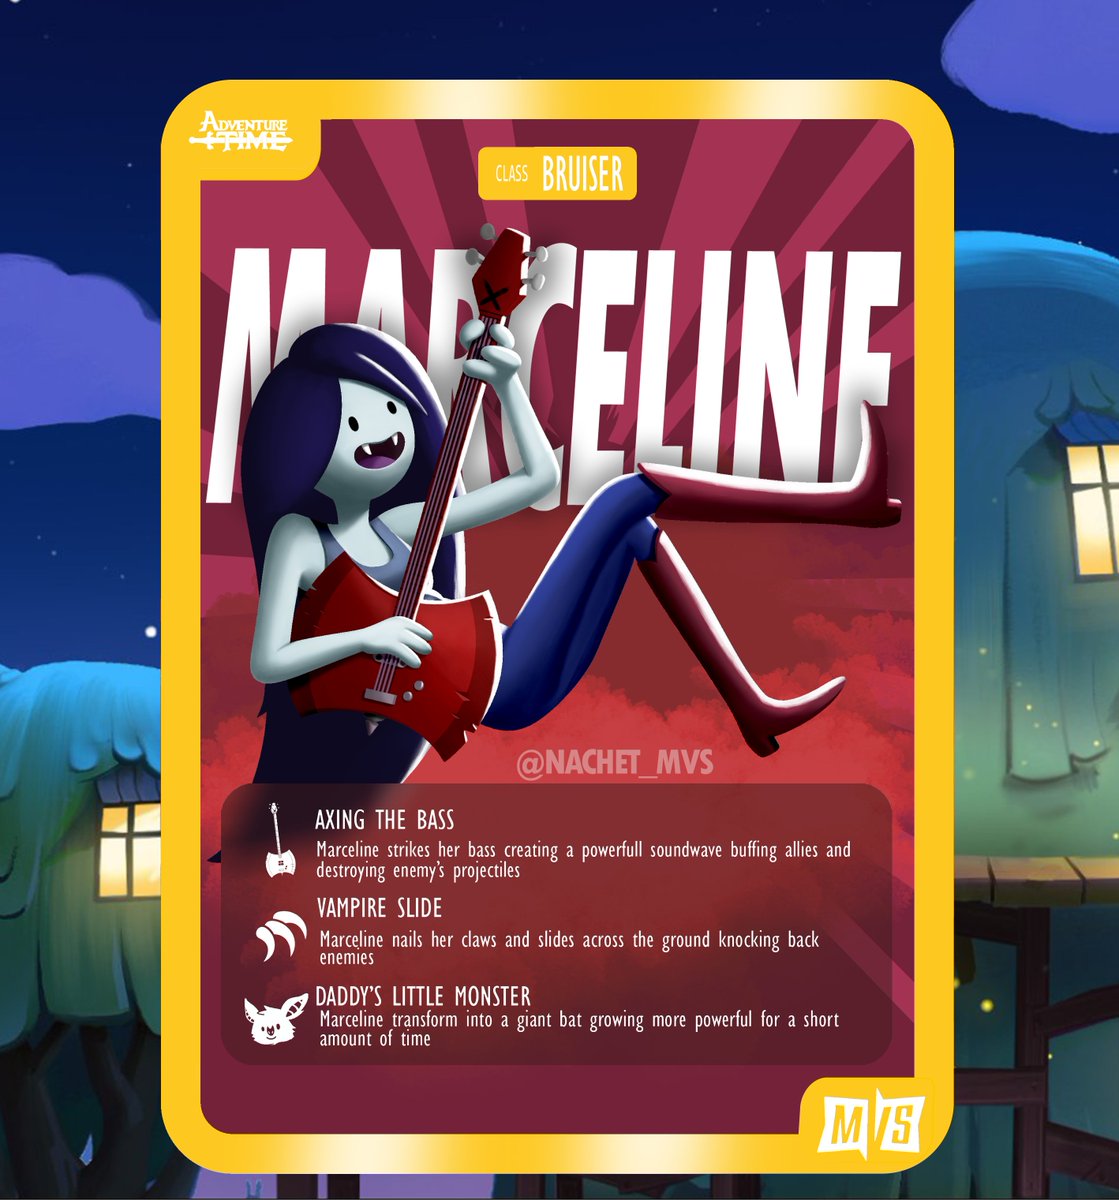 New Marceline #MultiVersus concept!
She has always been one of my favs I really hope she gets added soon to the game! 
I think her deault outfit should be her grey shirt
I hope you all like it!
#adventuretime #CartoonNetwork #marcelinethevampirequeen #marceline #RiseofMultiversus